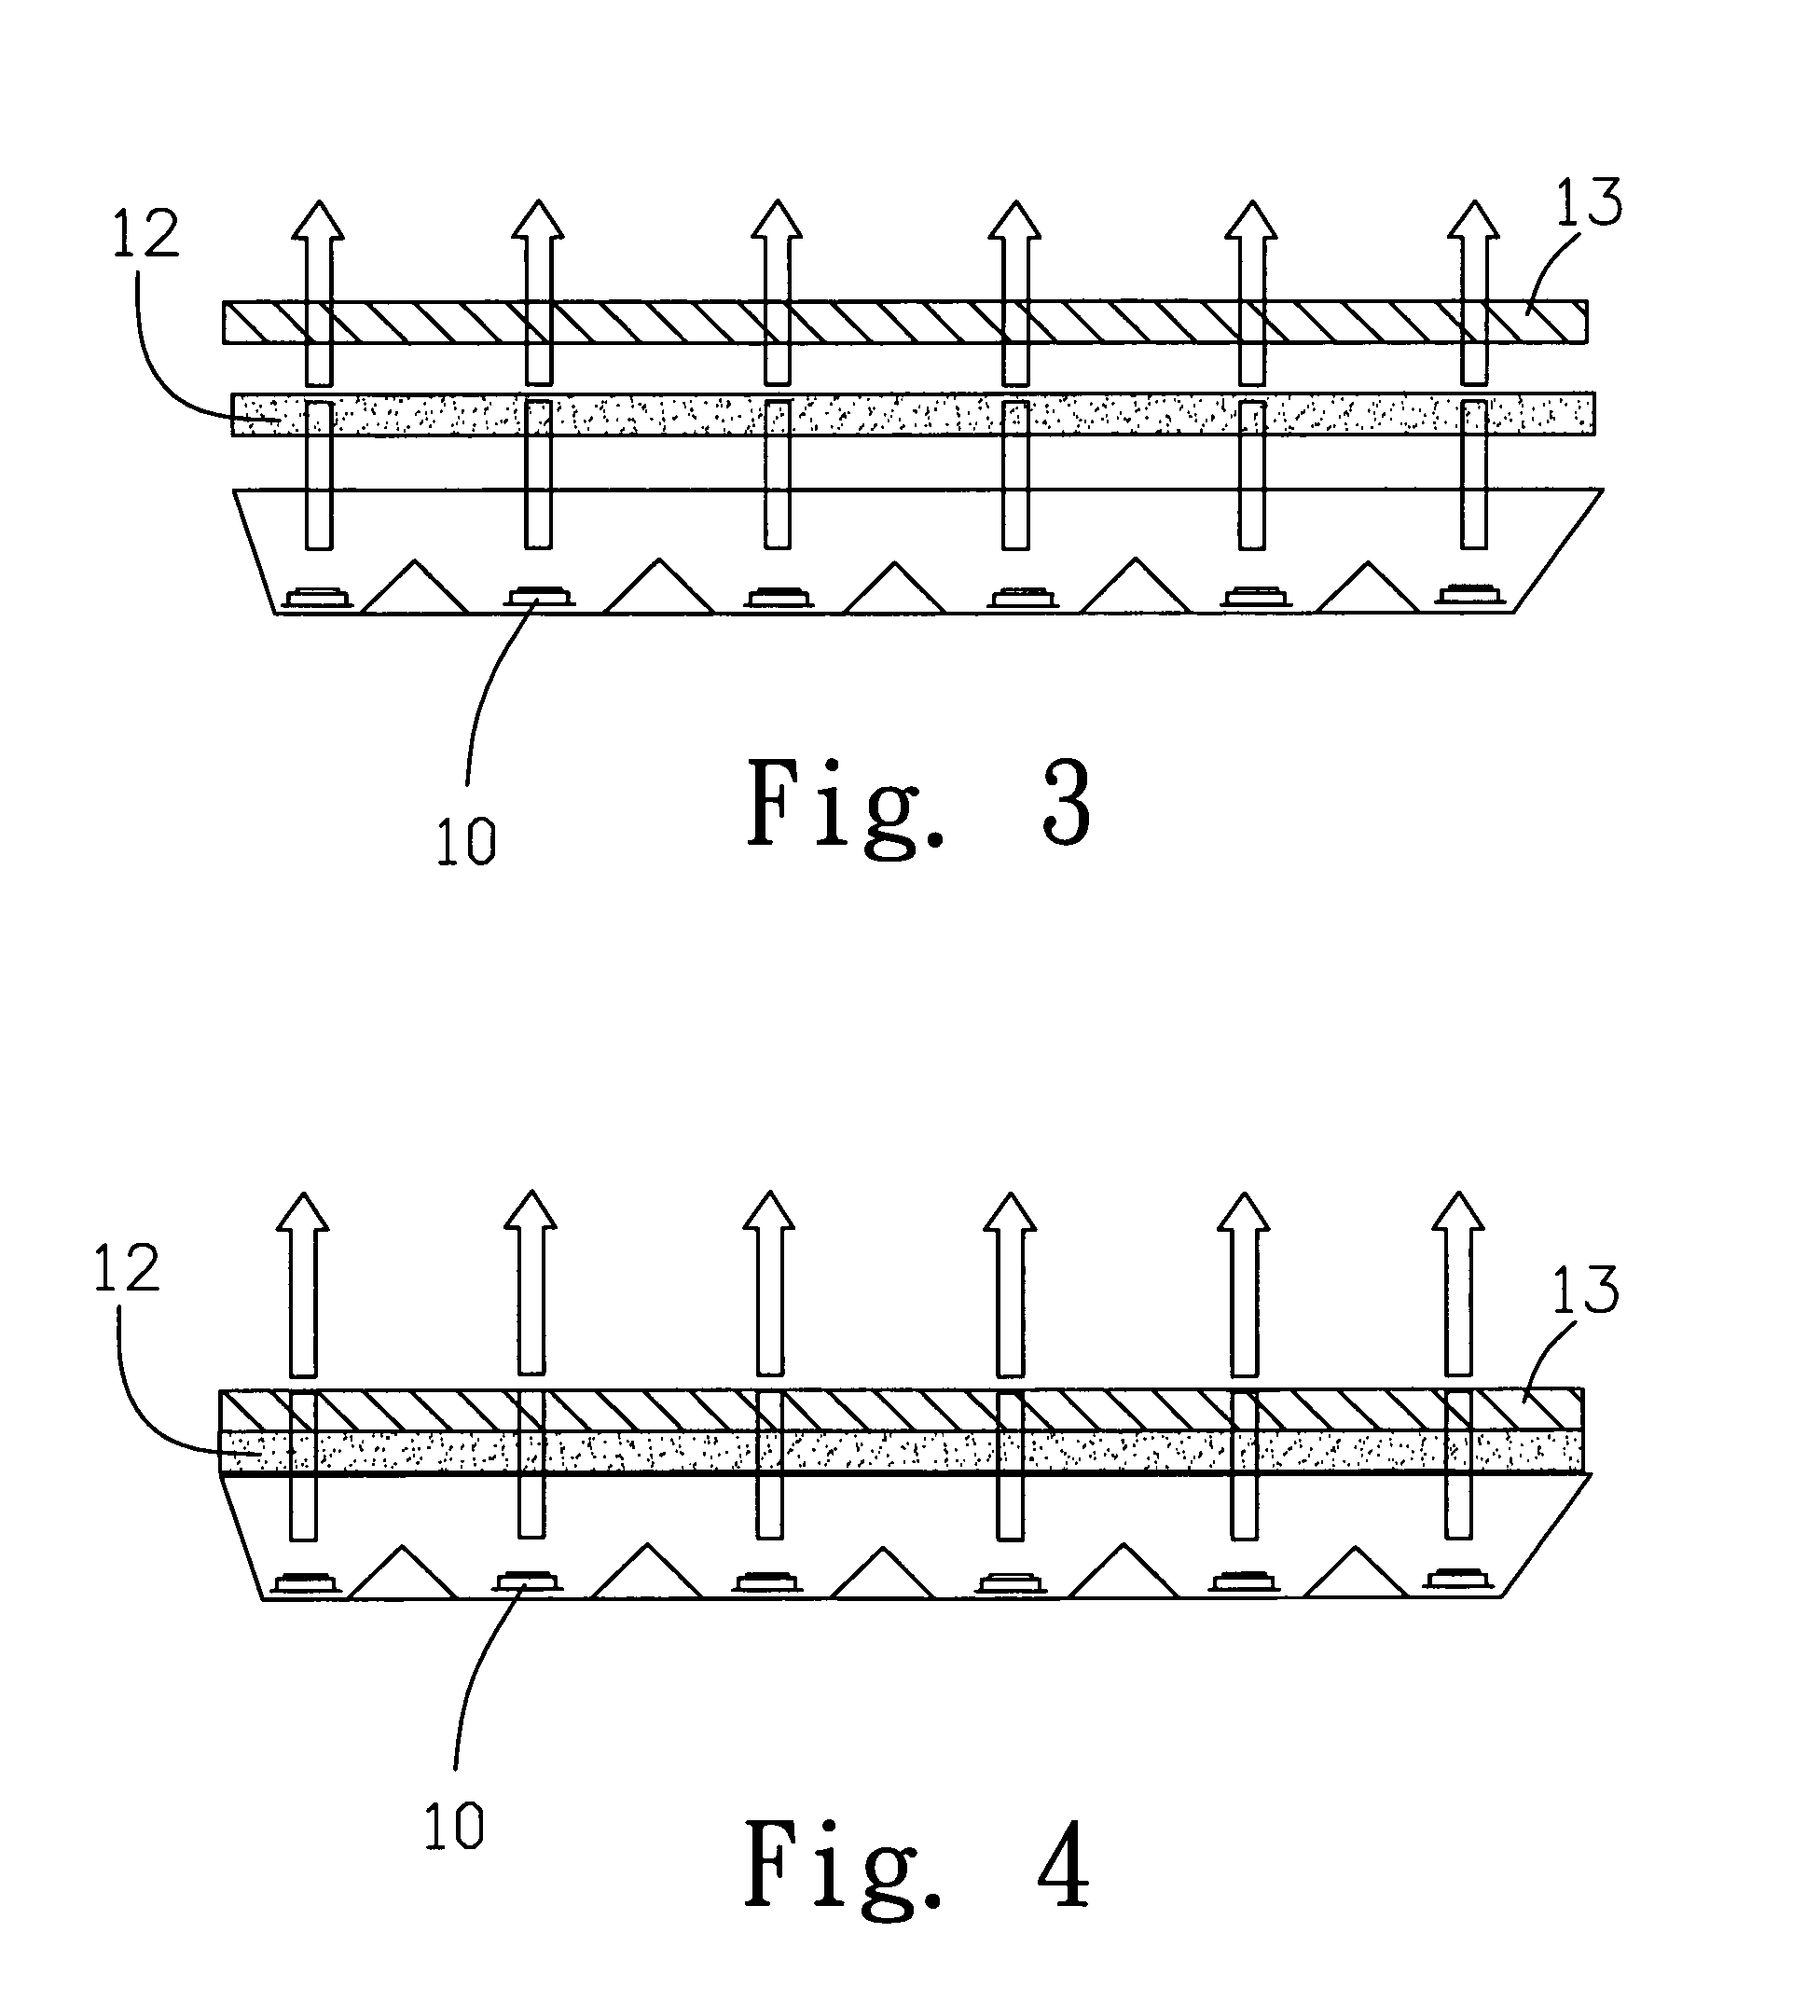 Light emitting module for producing a visible light by passive ultraviolet excitation